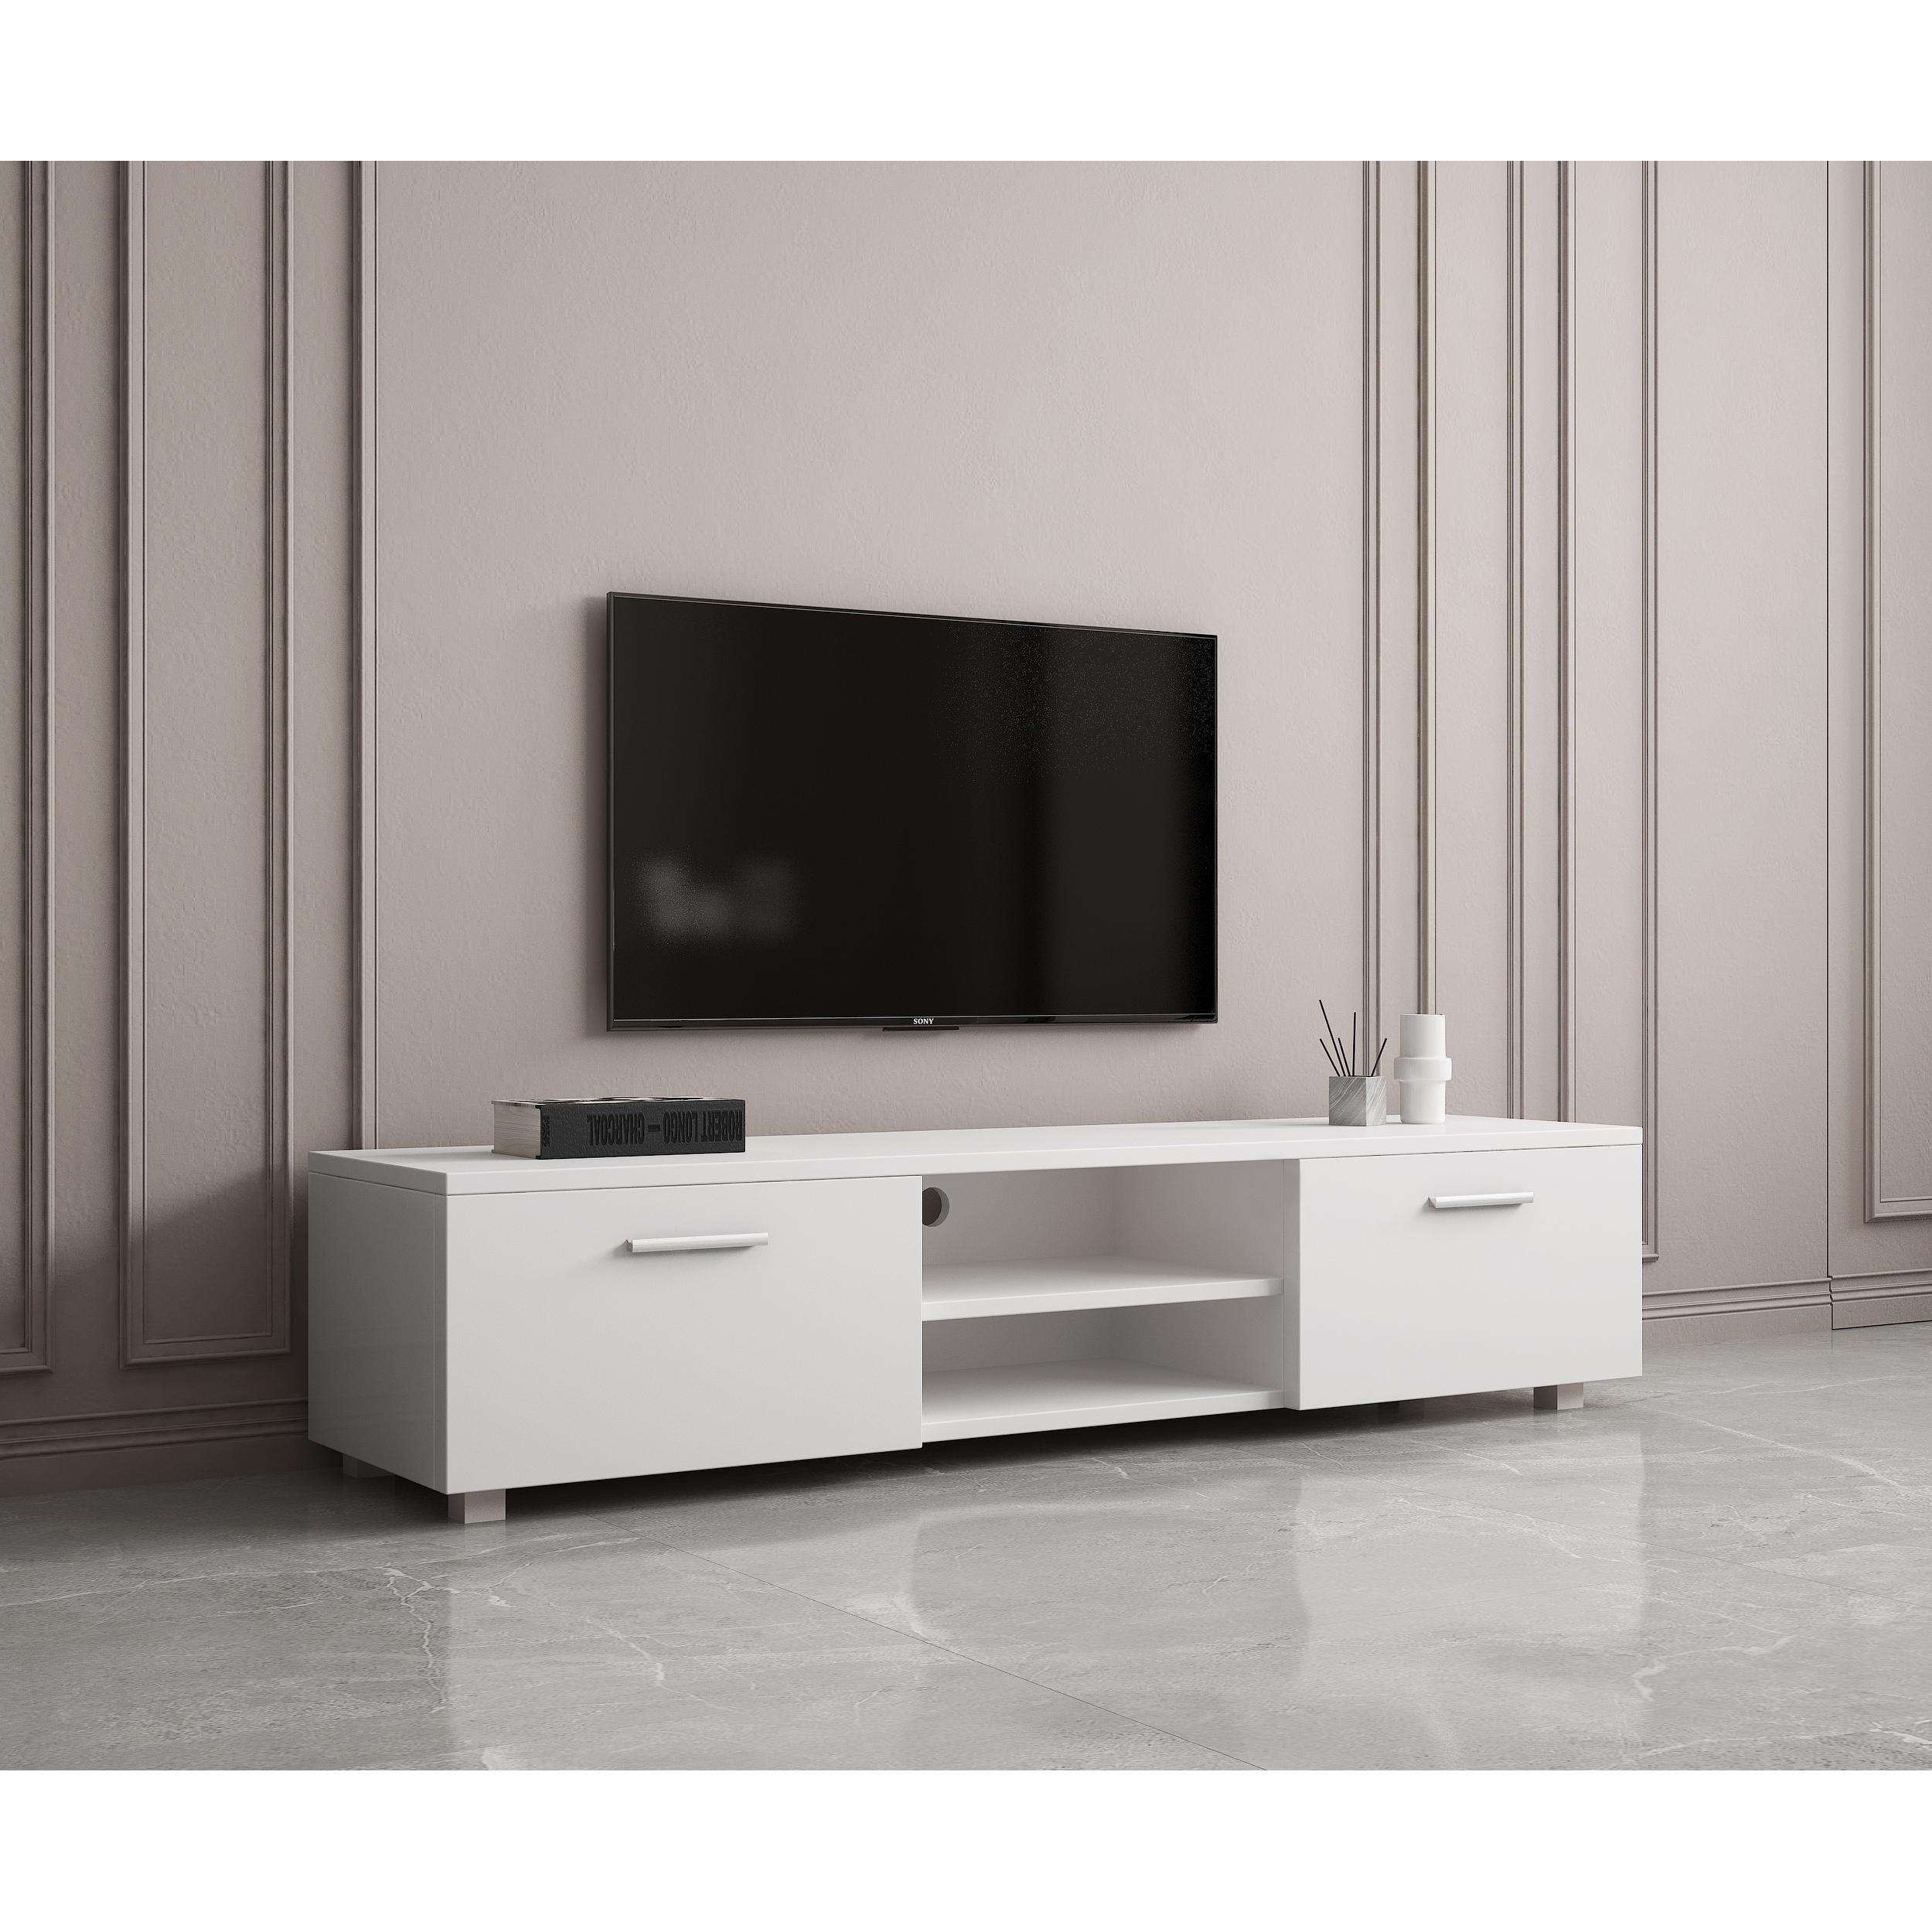 https://ak1.ostkcdn.com/images/products/is/images/direct/7c4f6a2881859810dc44688ed0671a85677e9870/TV-Stand-with-2-Storage-Cabinet-and-Open-Shelves.jpg